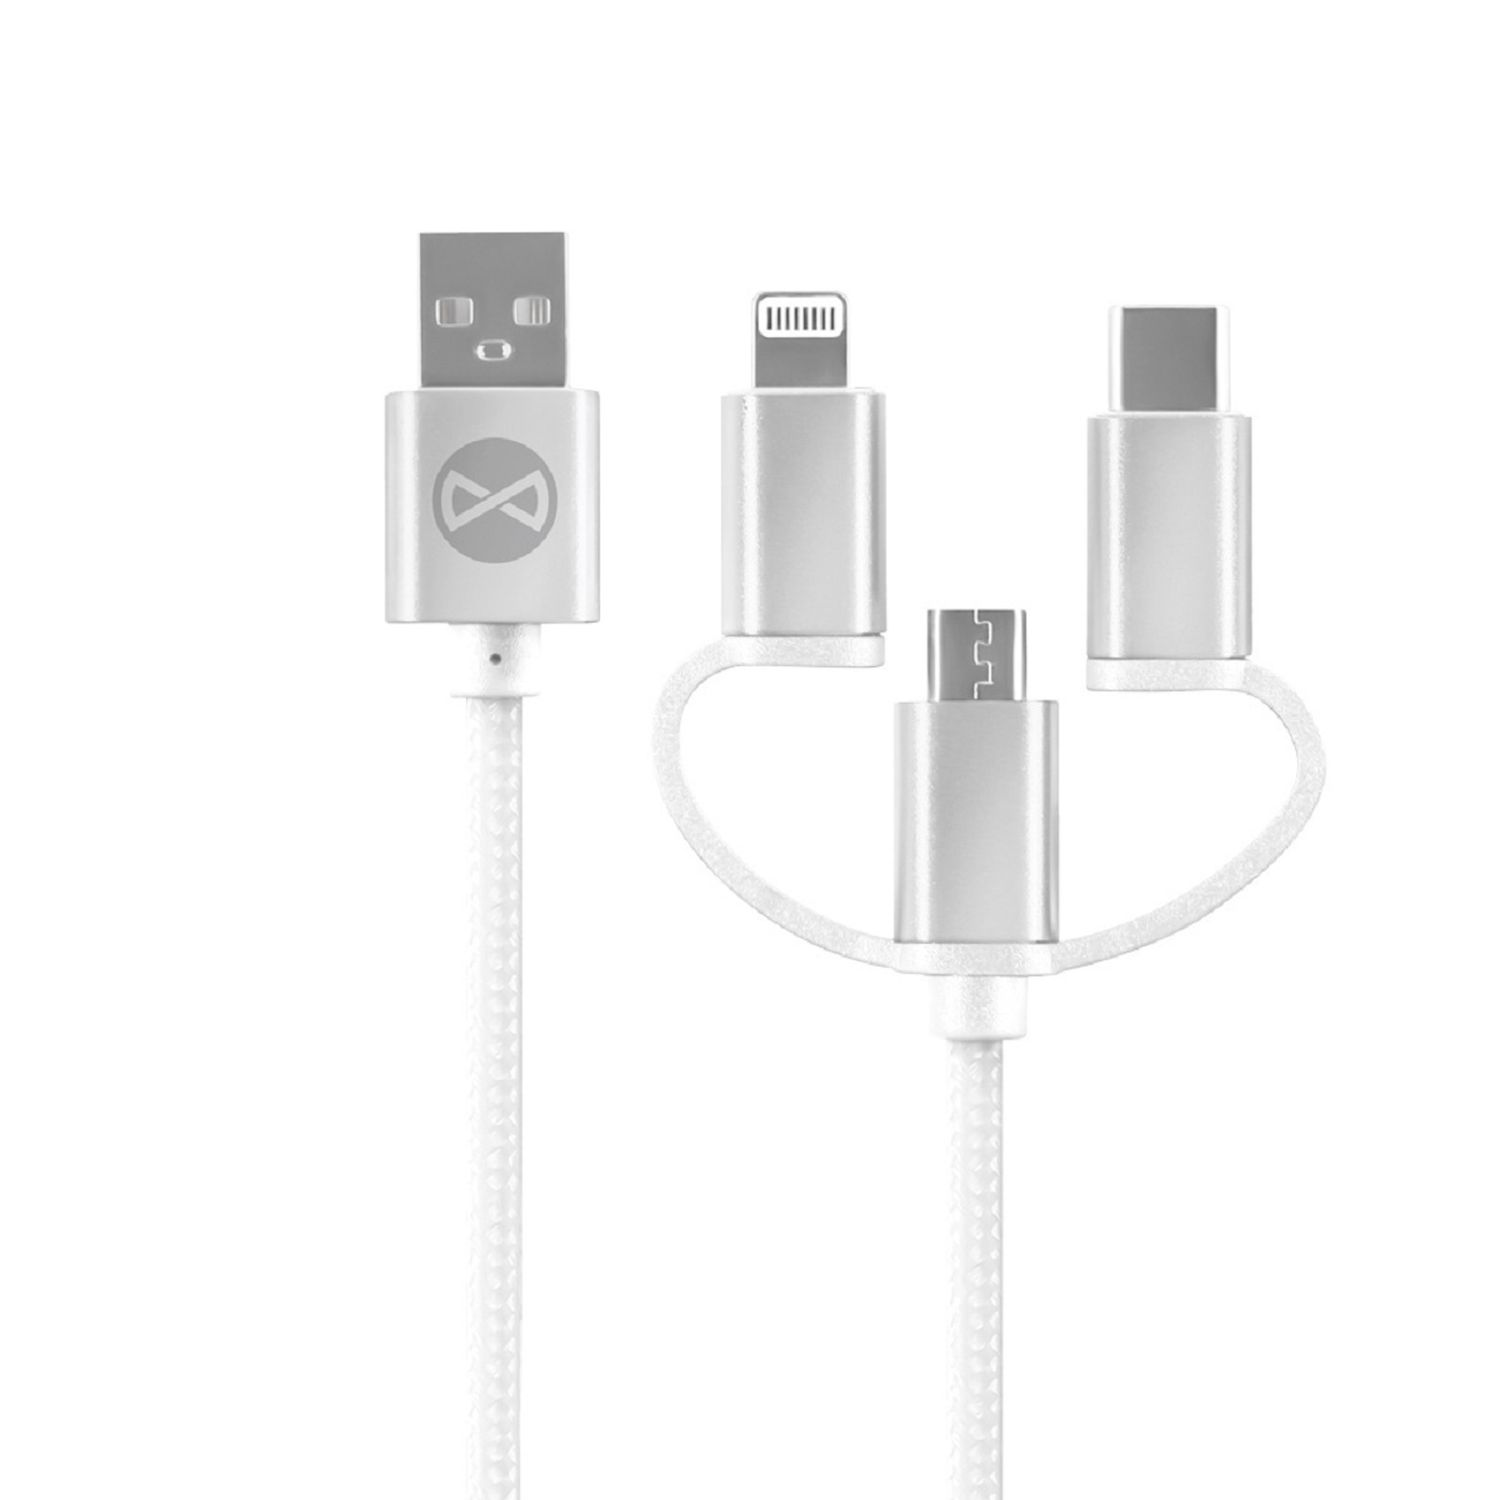 FOREVER 3in1 USB - + Ladekabel, iPhone + microUSB USB-C 1,2m, Weiß